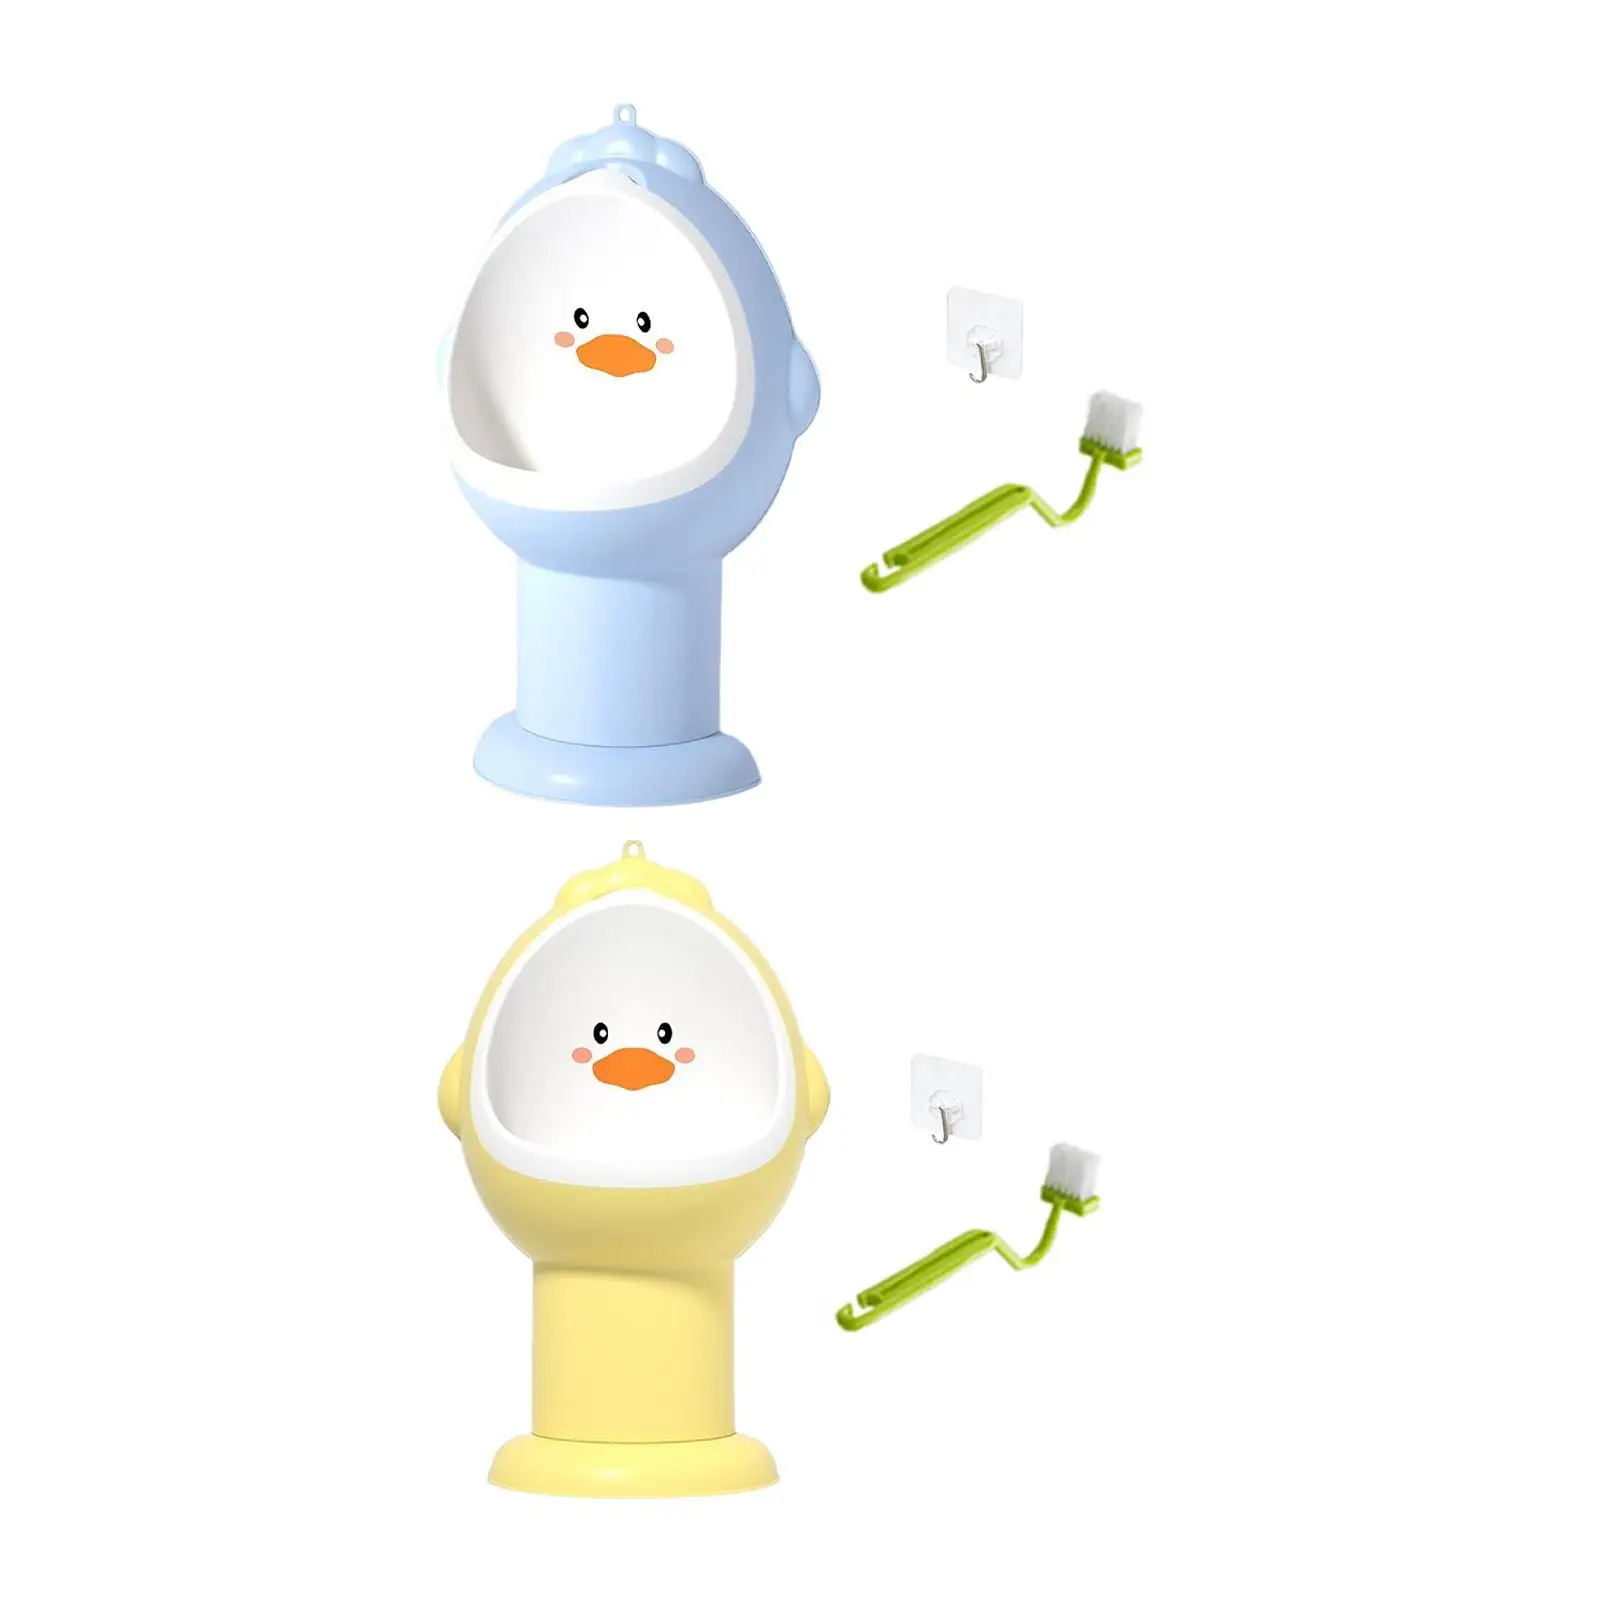 Hanging Standing Potty with Hook Portable Children Stand Vertical Urinal